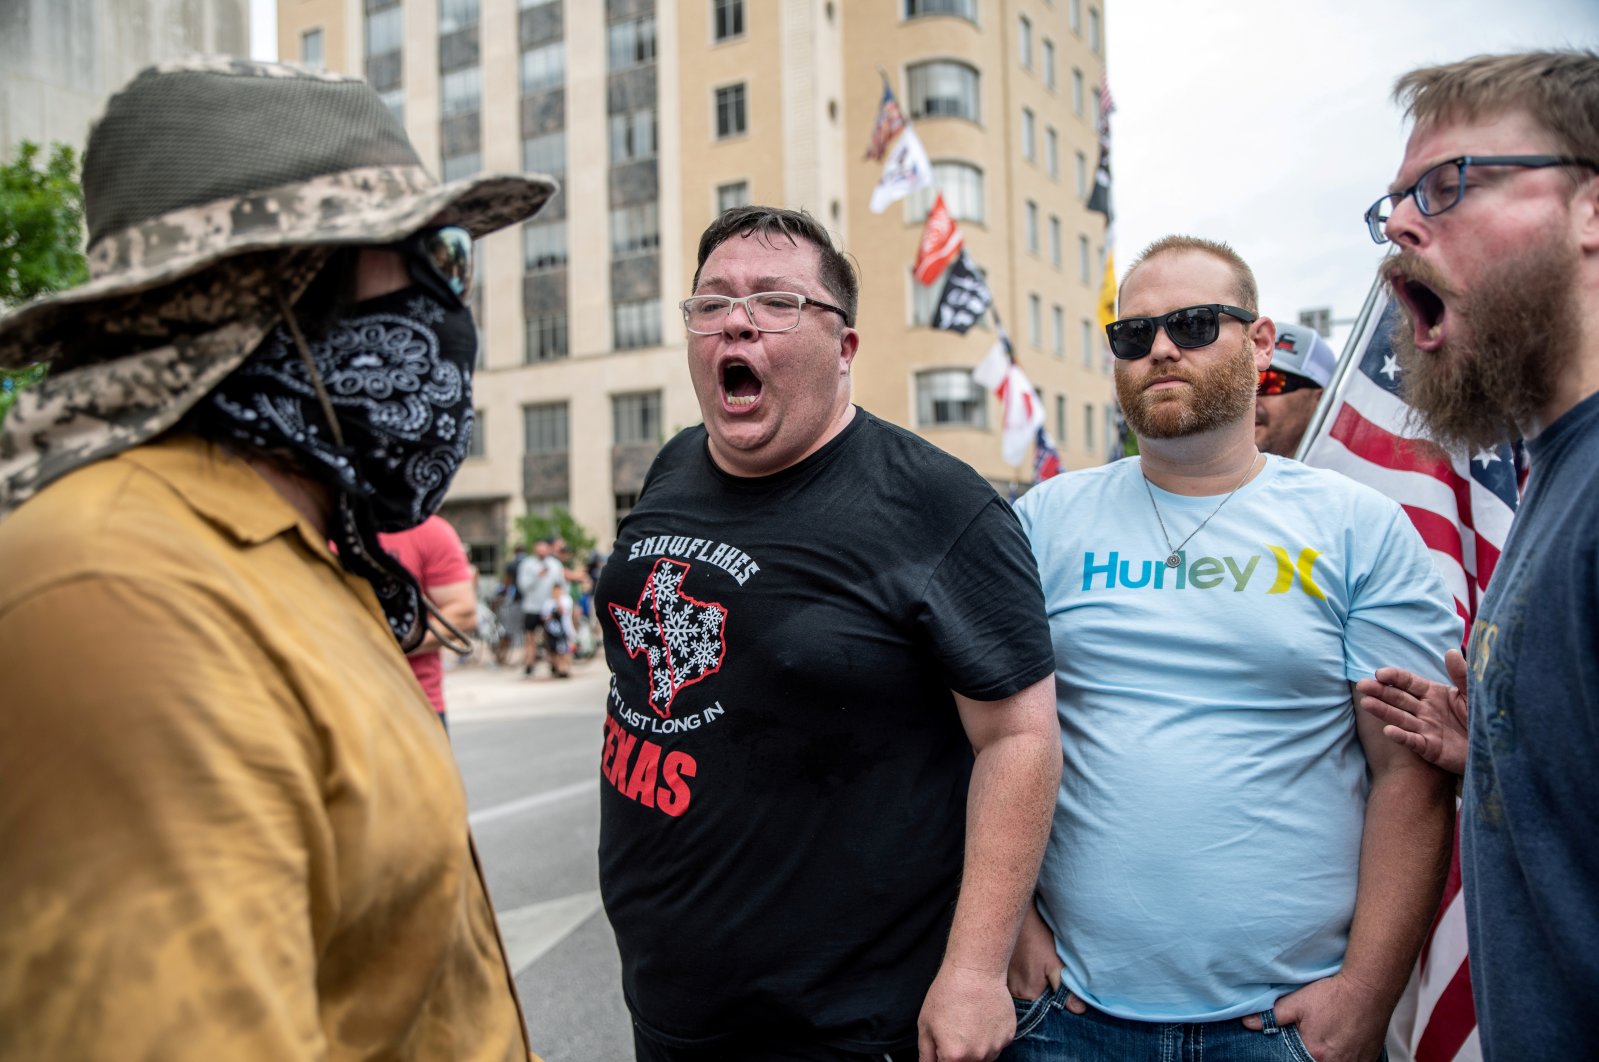 Photo shows mask-averse males protesting against mandates to wear masks amid the COVID-19 outbreak in Austin, Texas, U.S., June 28, 2020. (Reuters Photo)